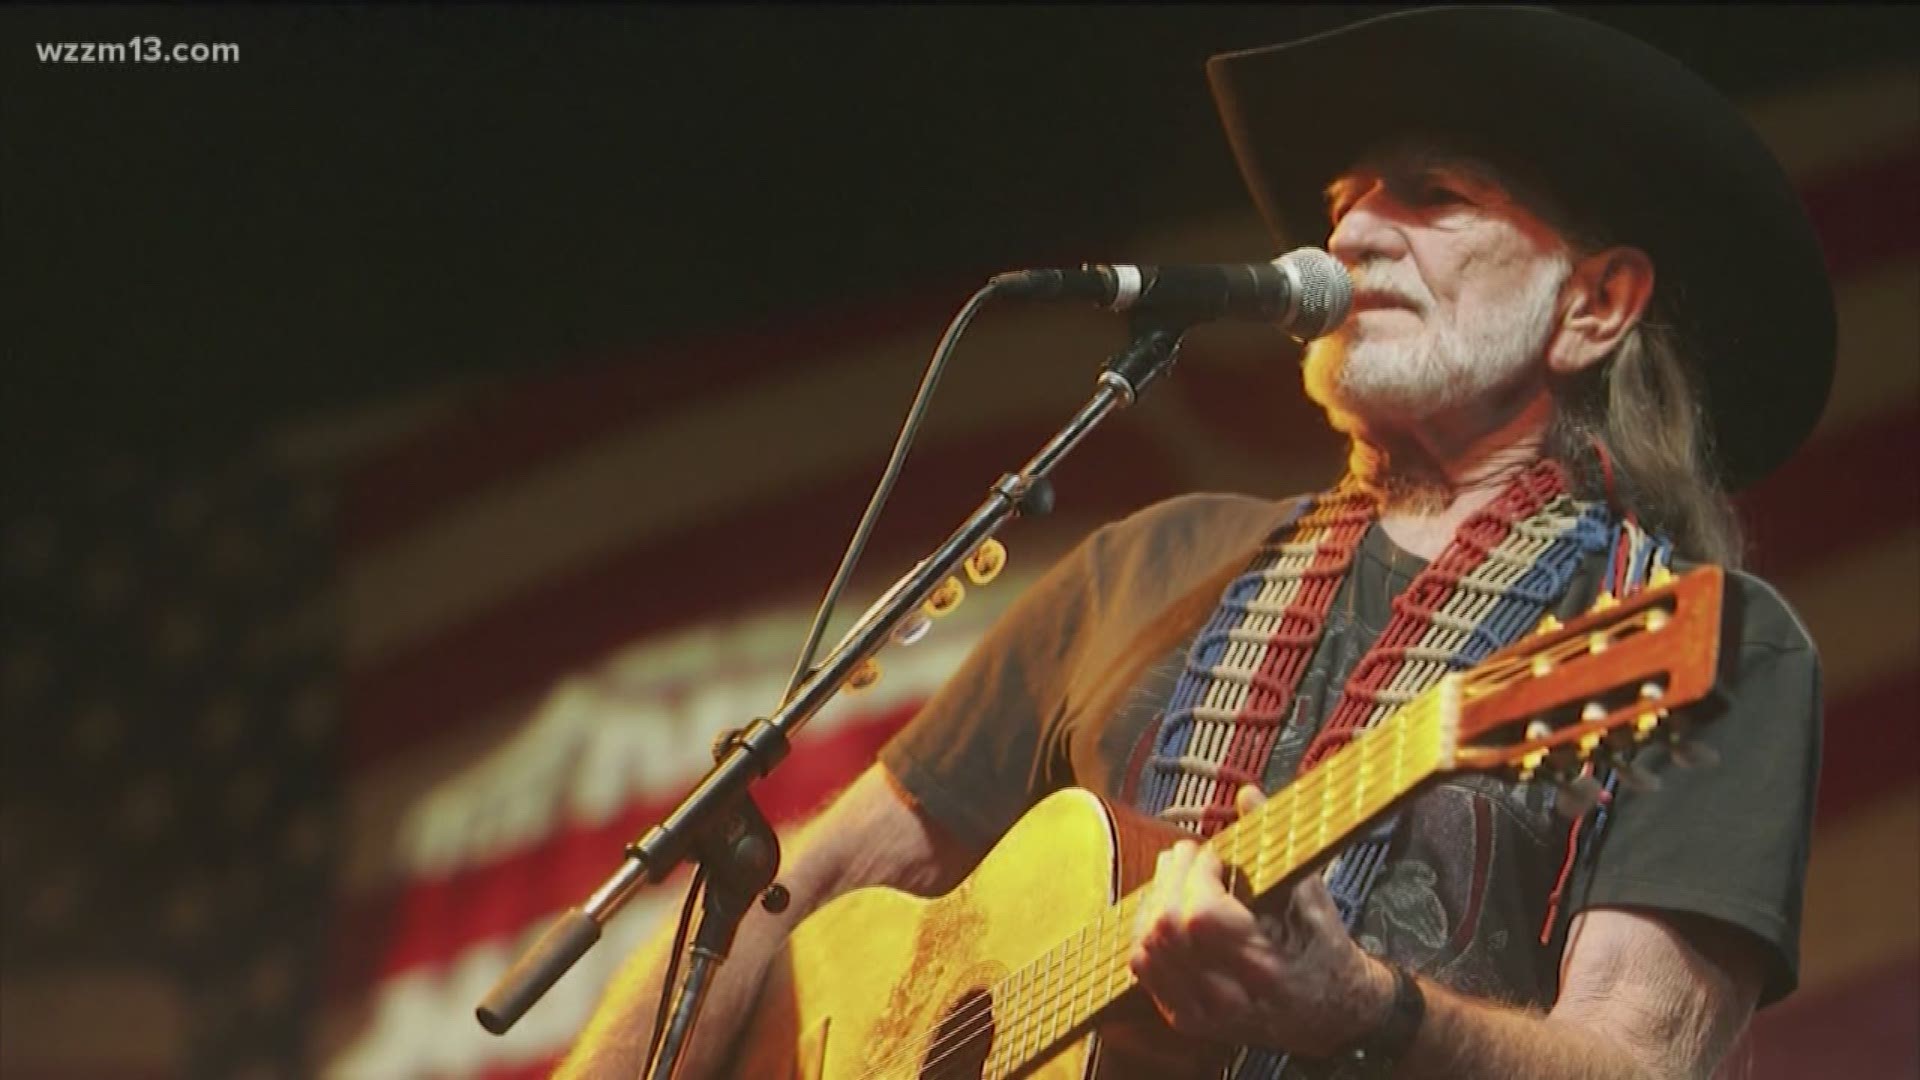 Country music legend Willie Nelson and 27-time Grammy award winner Alison Krauss will be performing at Van Andel Arena August 9. Tickets for the show go on sale at 10 a.m. on Friday, April 19.